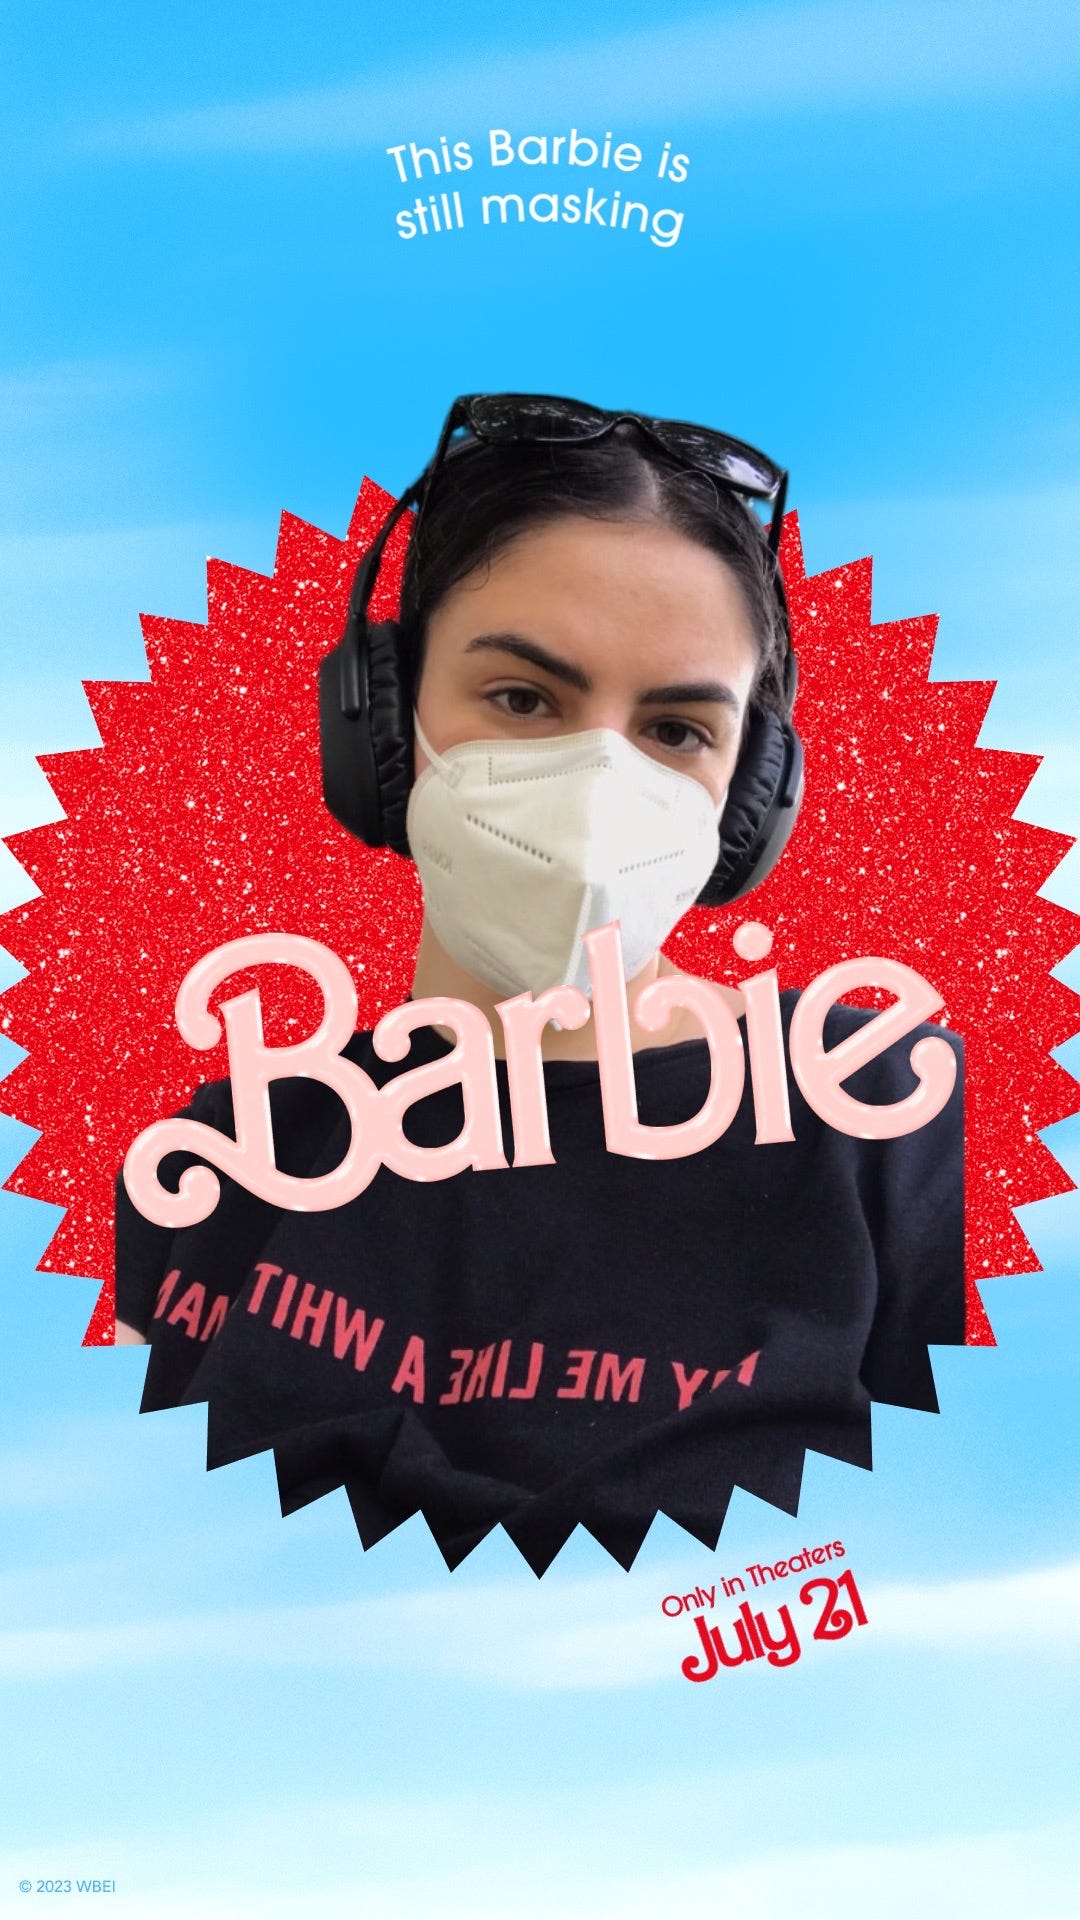 Shareable content for promo of Barbie movie 2023 - Includes photo of Rimu wearing black headphone and a white N95 with the the text 'this barbie is still masking'